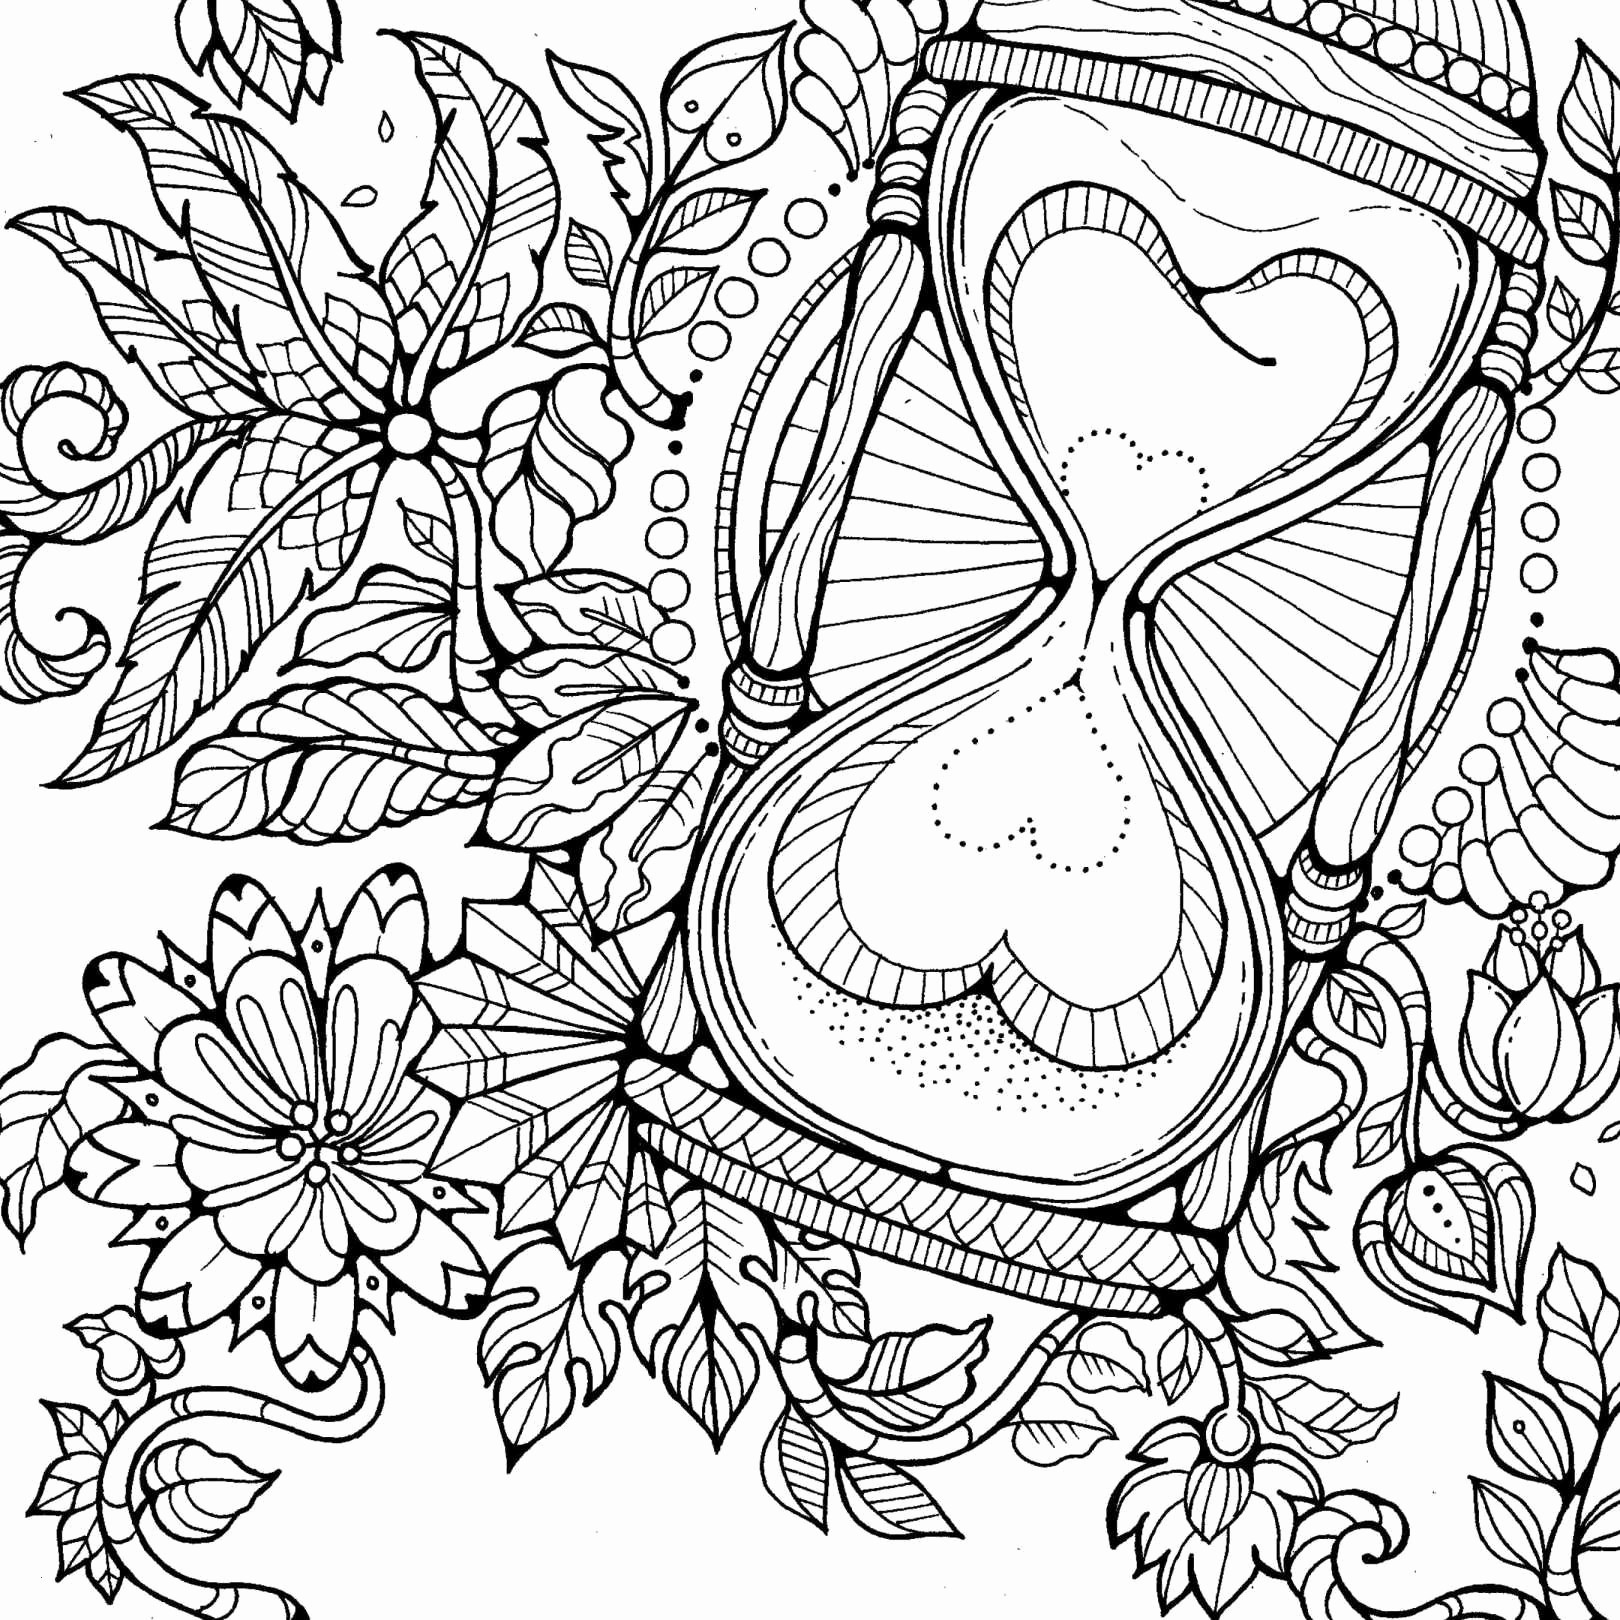 14 Famous Fish Design Vase 2024 free download fish design vase of vases flower vase coloring page pages flowers in a top i 0d and regarding 0d and freehigh quality coloring fnaf coloring book best coloring book art luxury coloring bookh